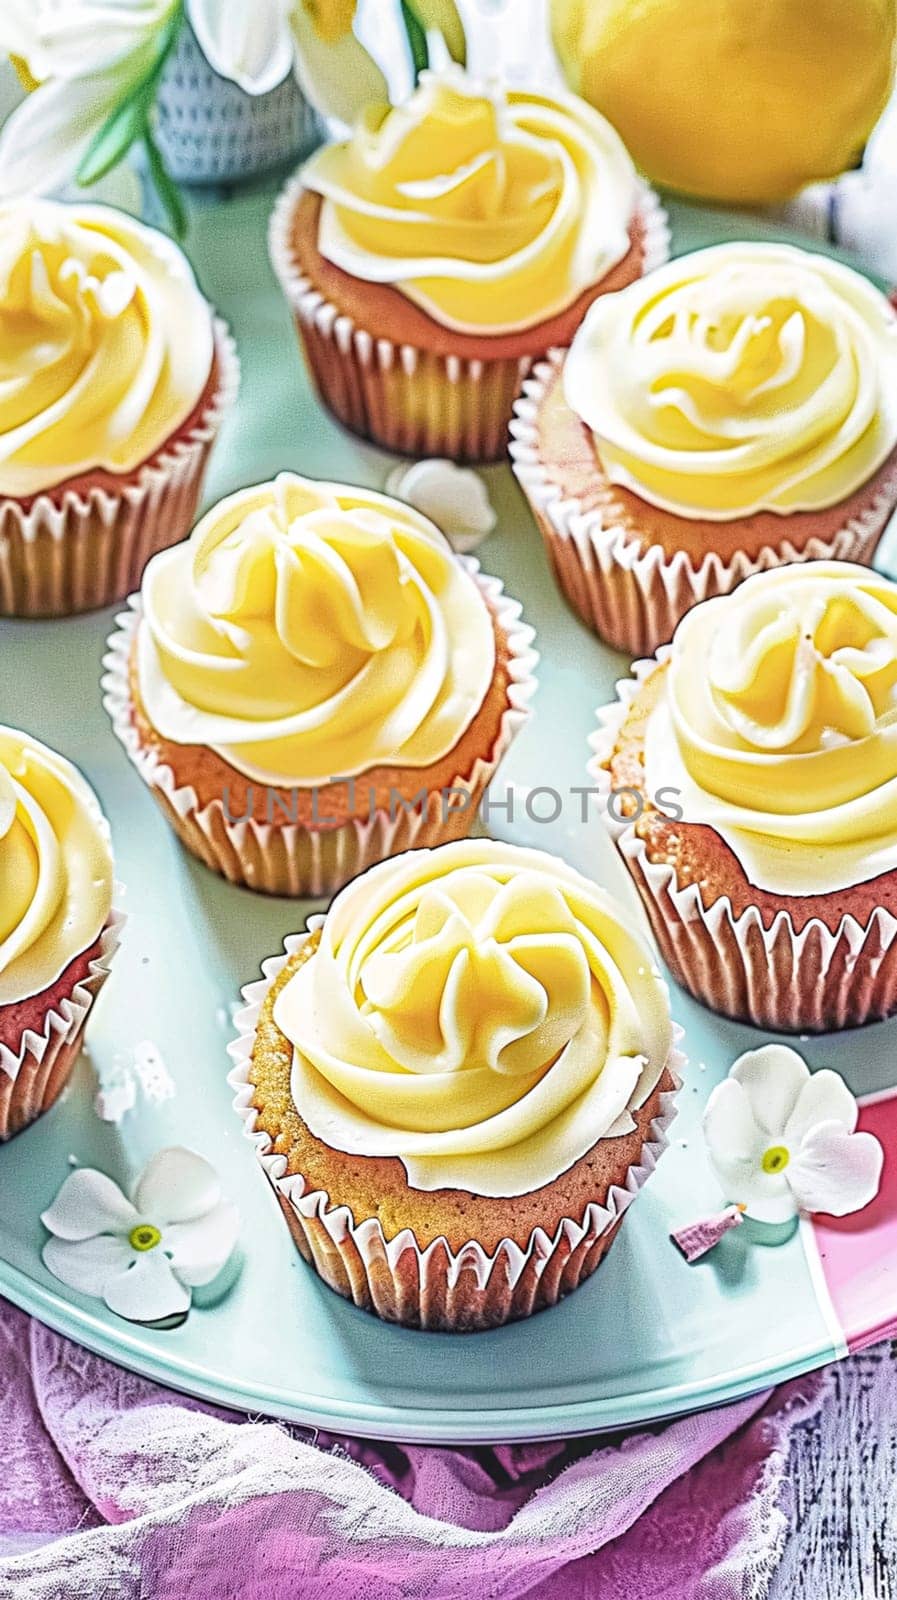 Homemade lemon cupcakes with buttercream frosting, baking recipe by Anneleven